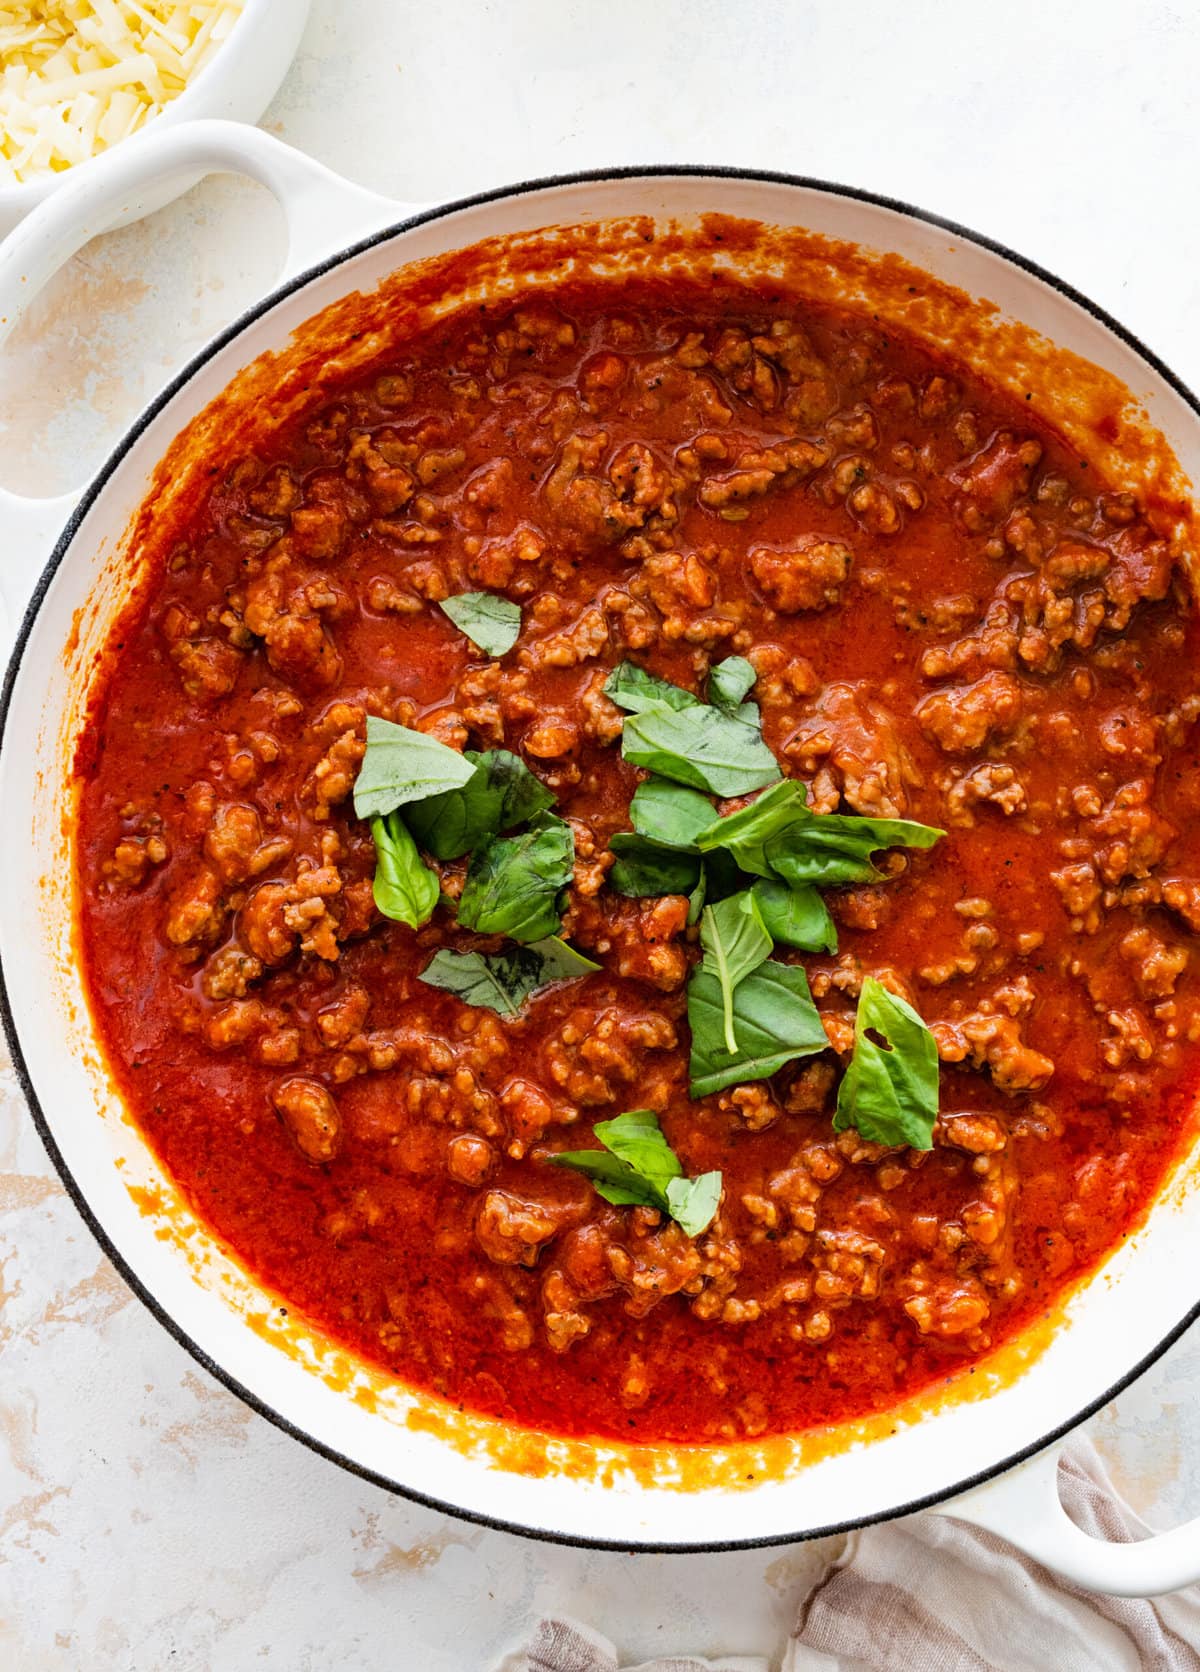 How to make classic pasta al forno step-by-step: adding basil to the pan with meat and sauce.